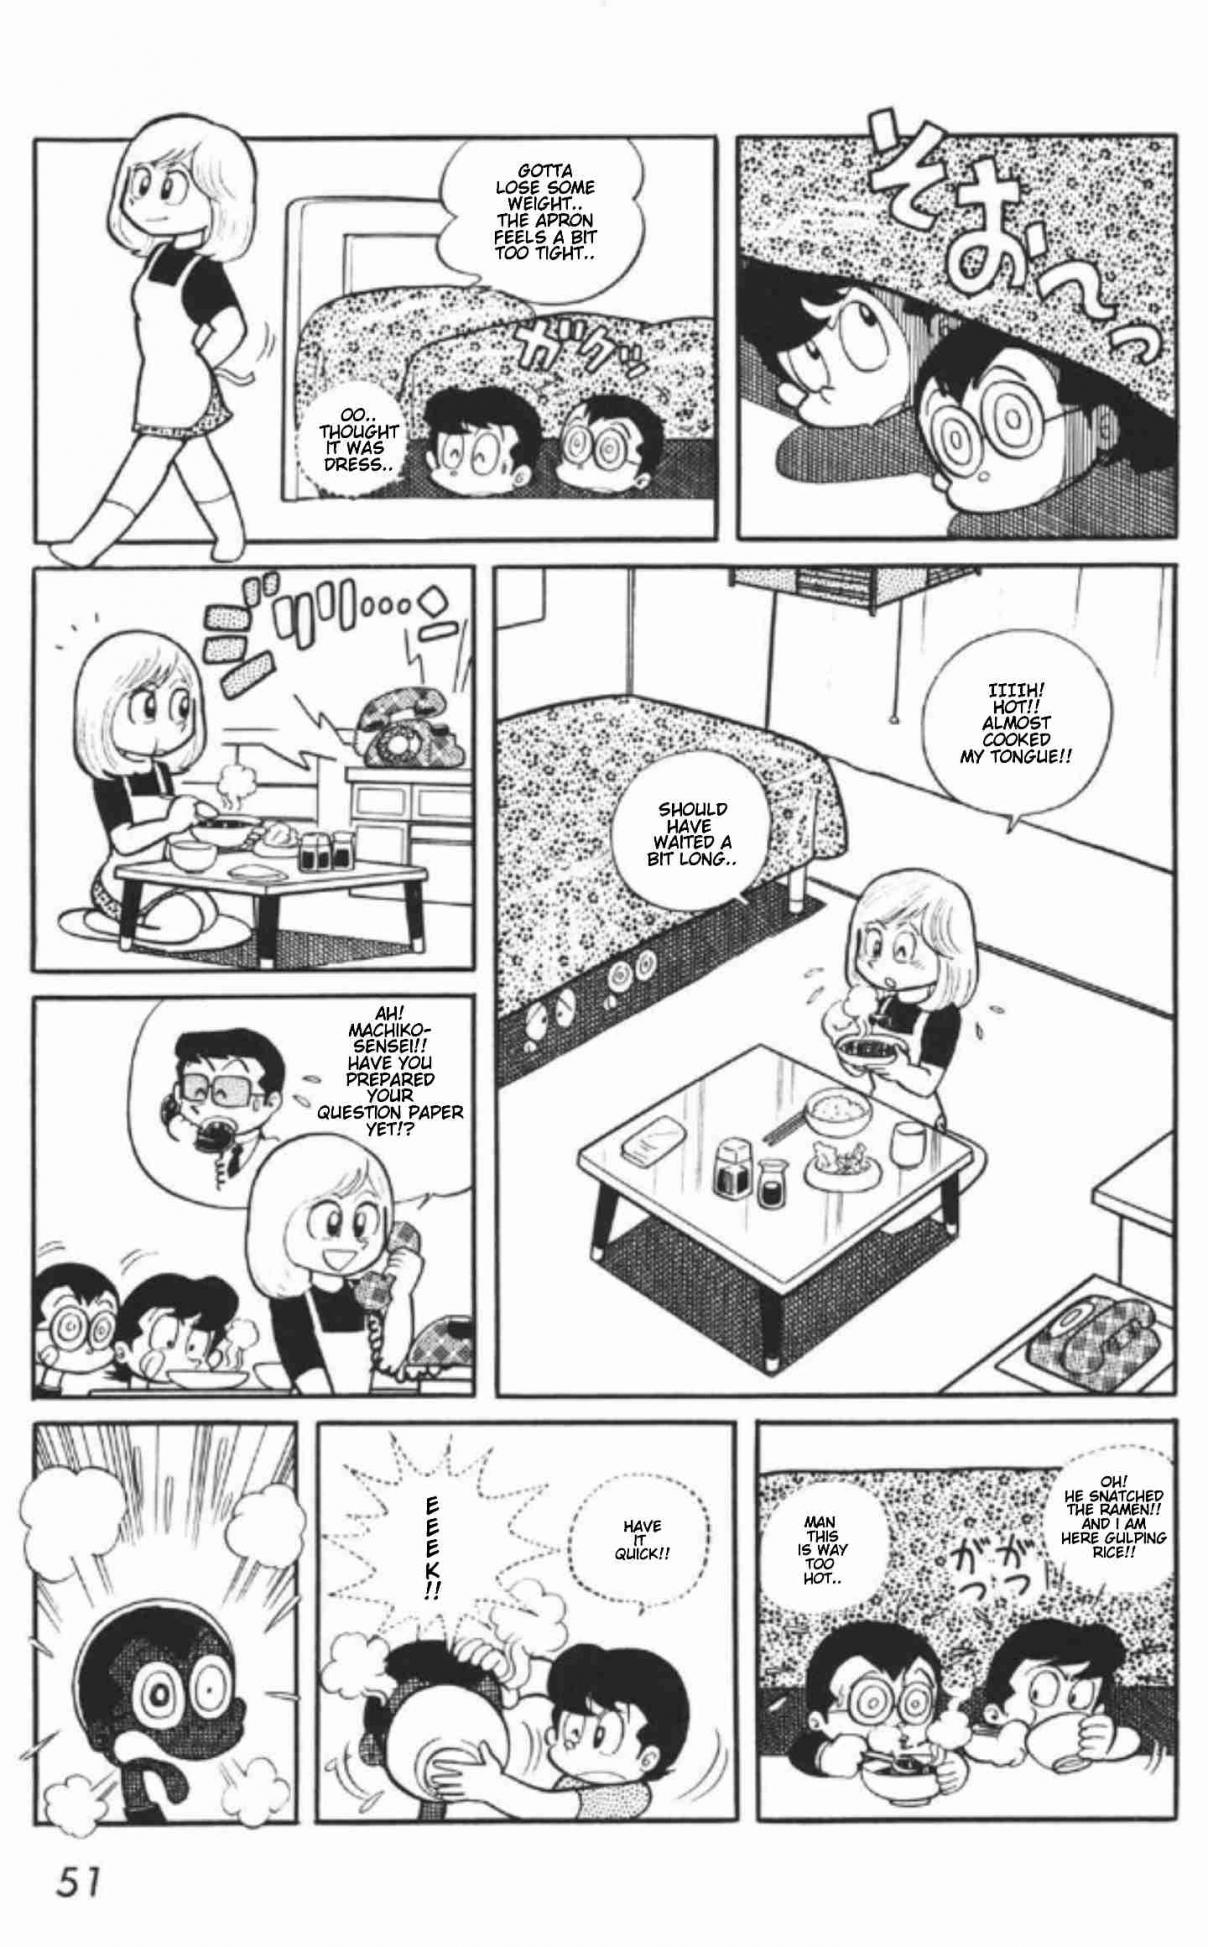 The Shame of Miss Machiko Vol. 1 Ch. 2 A Rather Out of the bag Discovery!!